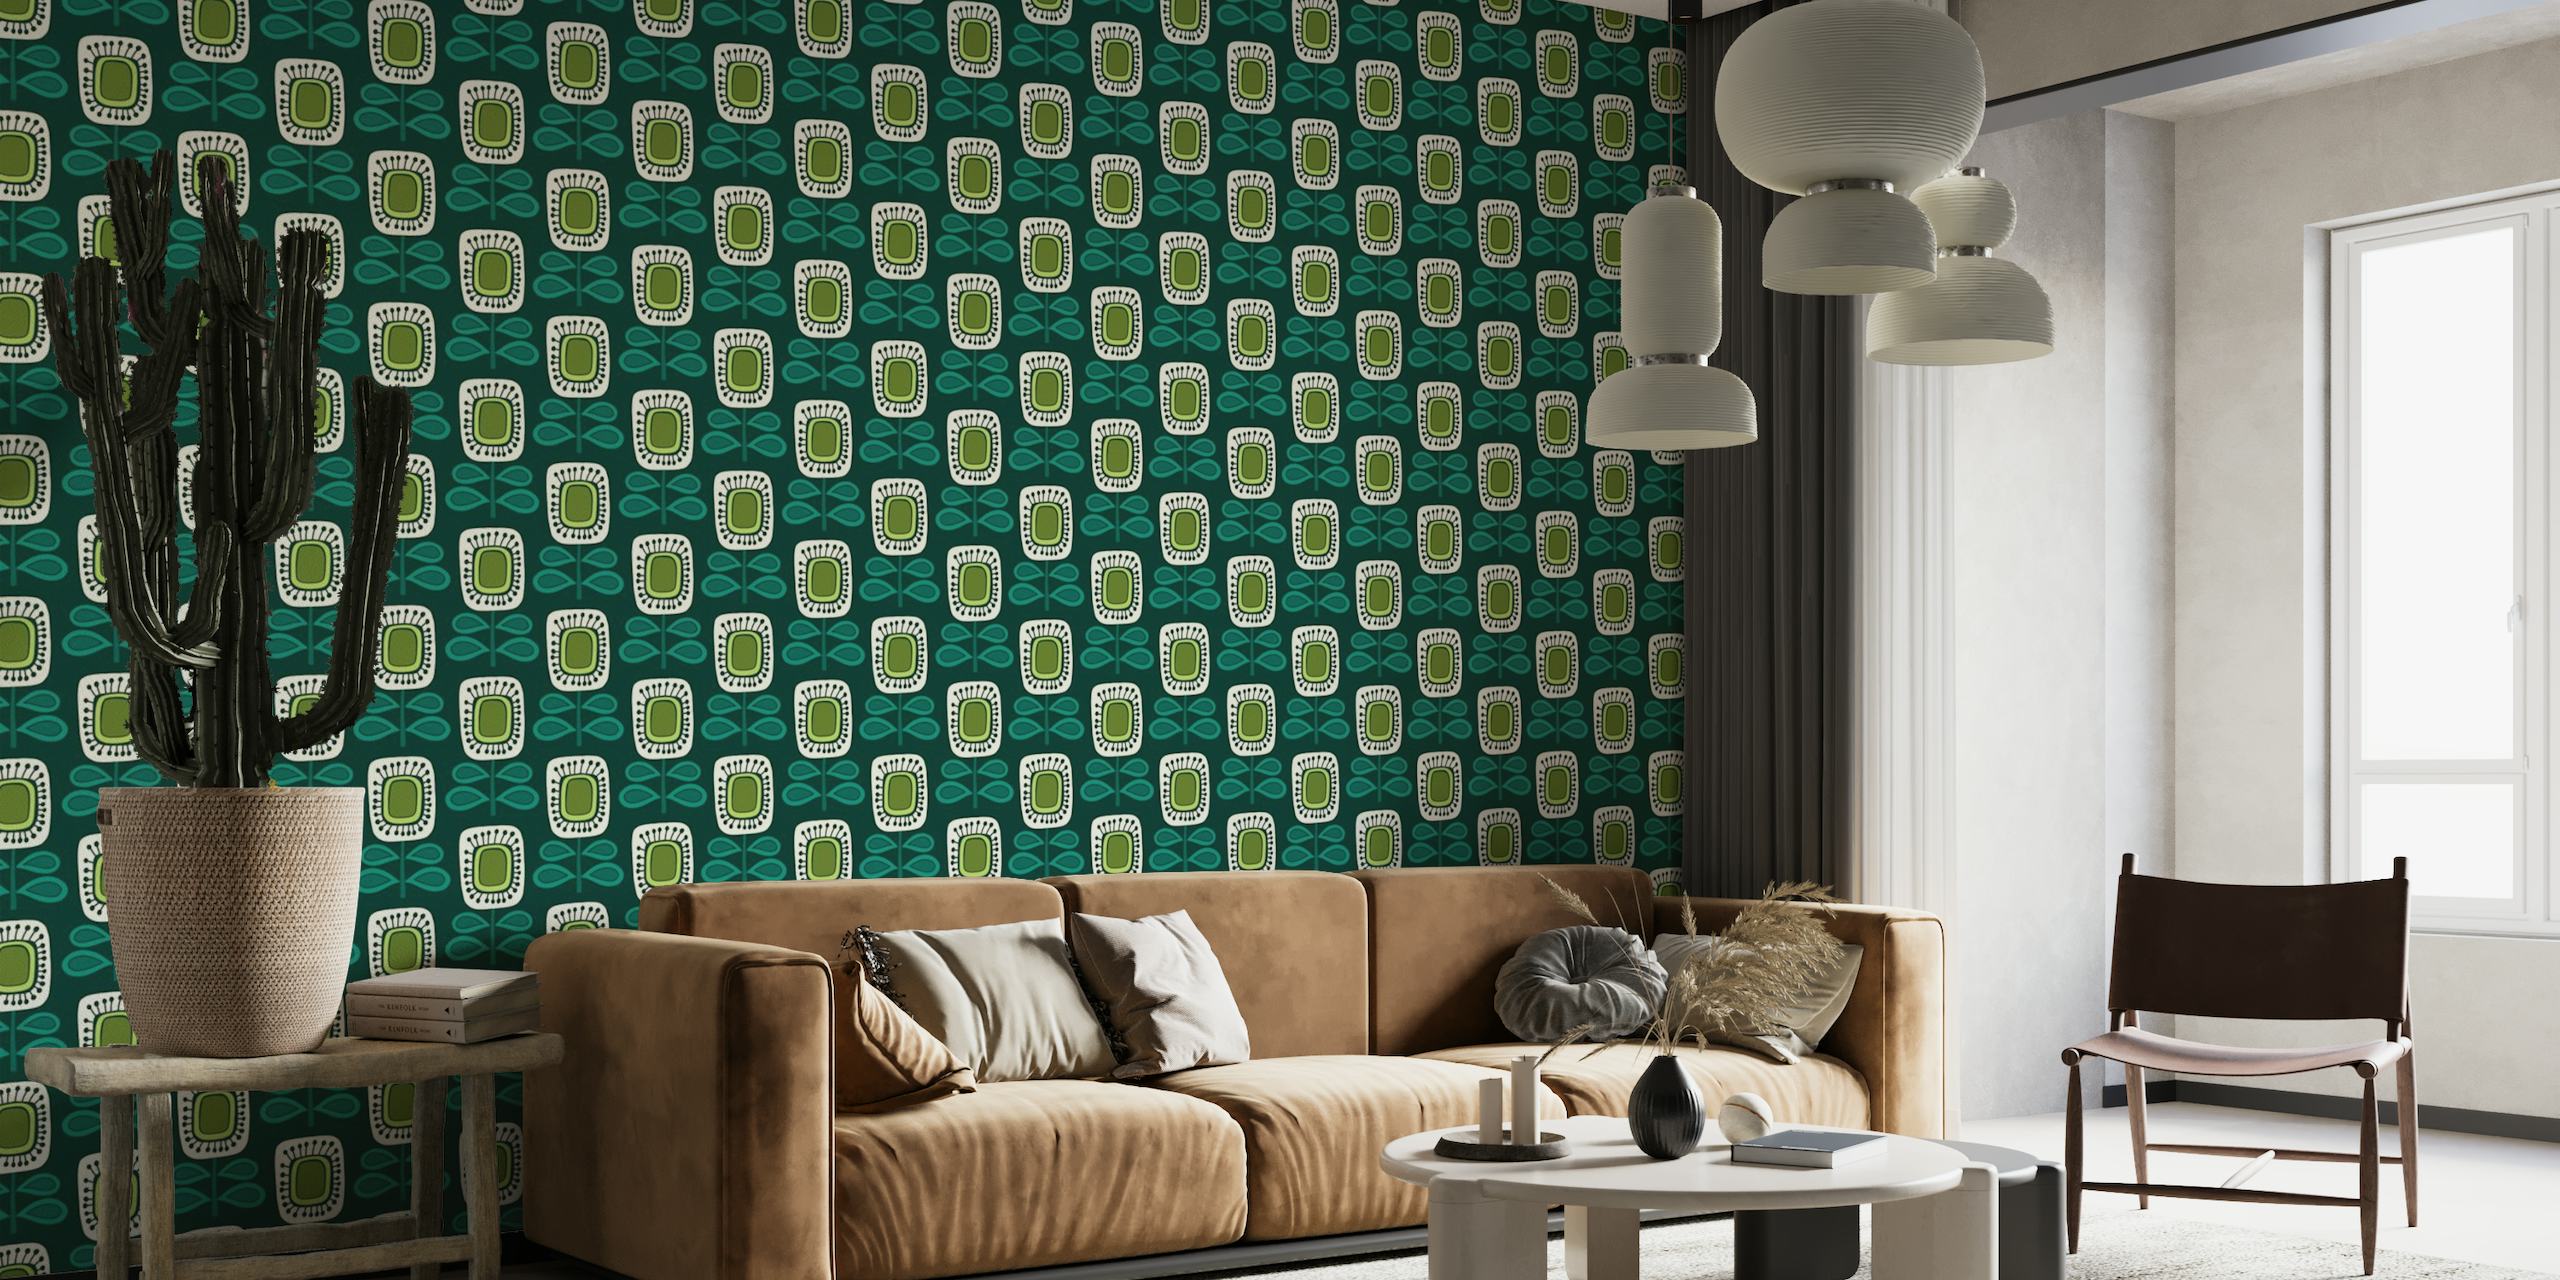 Stylized botanical shapes mural in dark green hues, reminiscent of a forest retreat